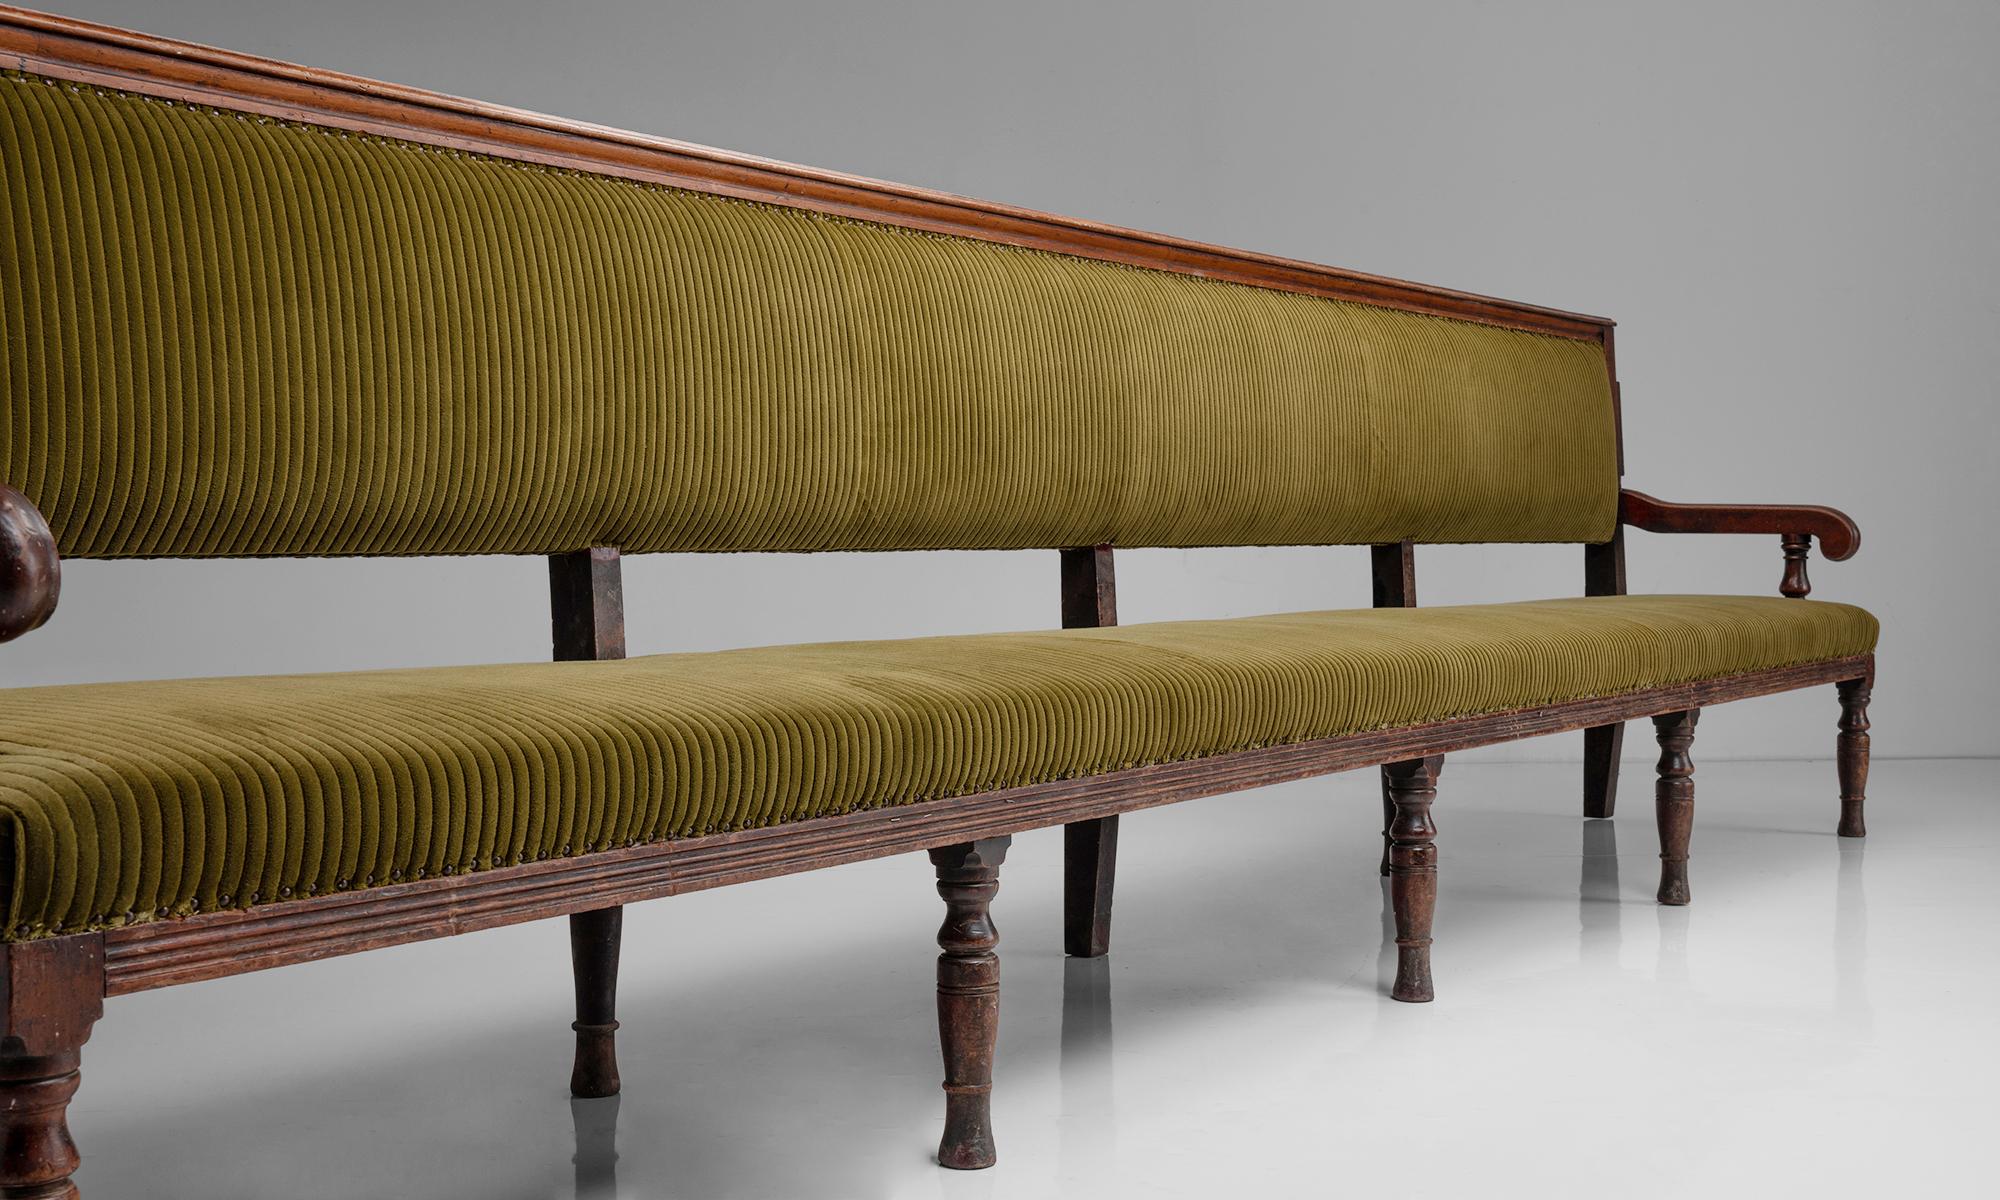 Massive Billiard room bench in wide wale velvet Corduroy

England Circa 1880

Mahogany frame in original condition with turned legs. Newly upholstered in wide Corduroy by Maharam.

Measures: 162